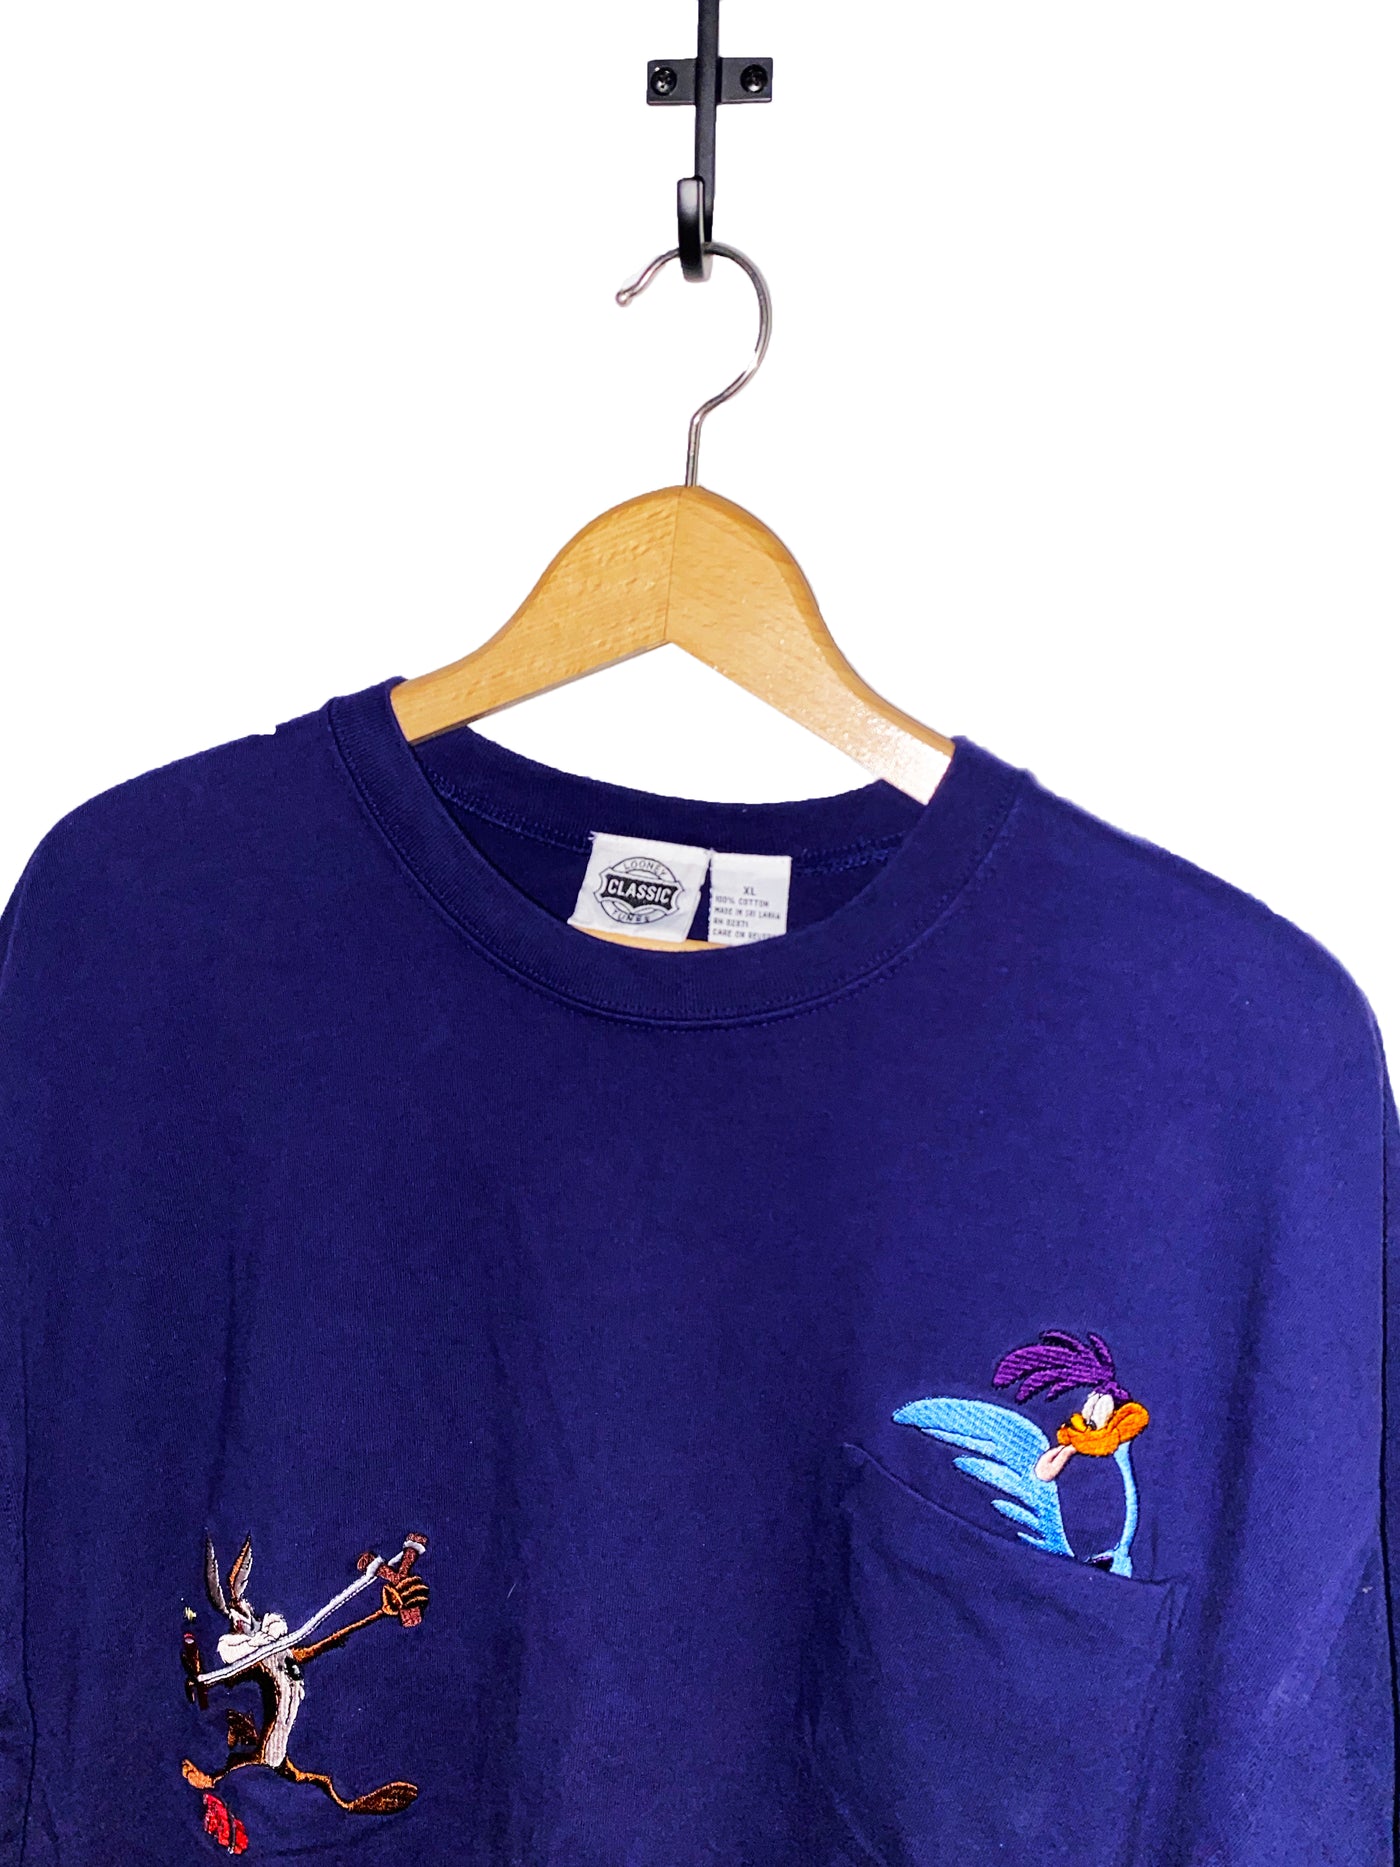 Vintage 1995 Looney Tunes Embroidered Pocket T-Shirt